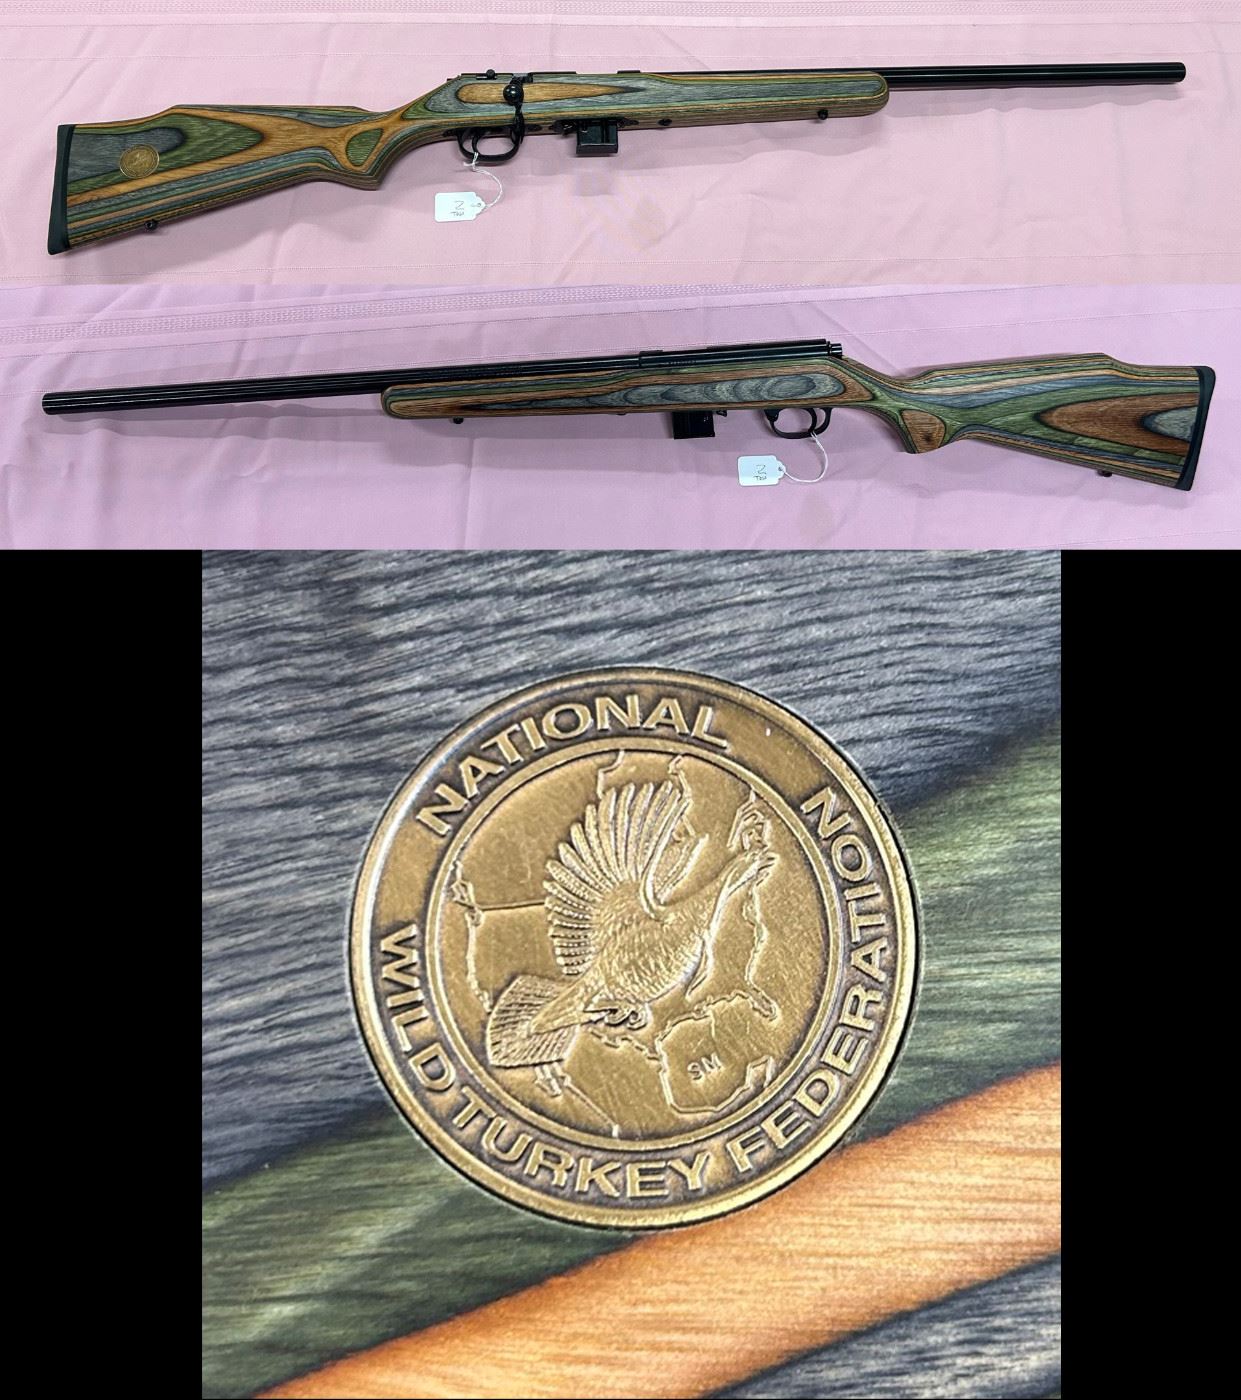 2.  Ducks Unlimited Marlin Firearms Model 917V .17HMR serial #96601293.  This gun has never been fired.                                                                                                             "YOU WILL WANT TO BE THERE FOR THESE HUNTING RIFLES and SHOTGUNS!!!                           SALE STARTS THURSDAY  JULY 13TH!"
(Call for more information and details on these Hunting Shotguns and Rifles)  See the rest of the collection at the last of the pictures of this page.                                               
SEE YOU THERE!!!